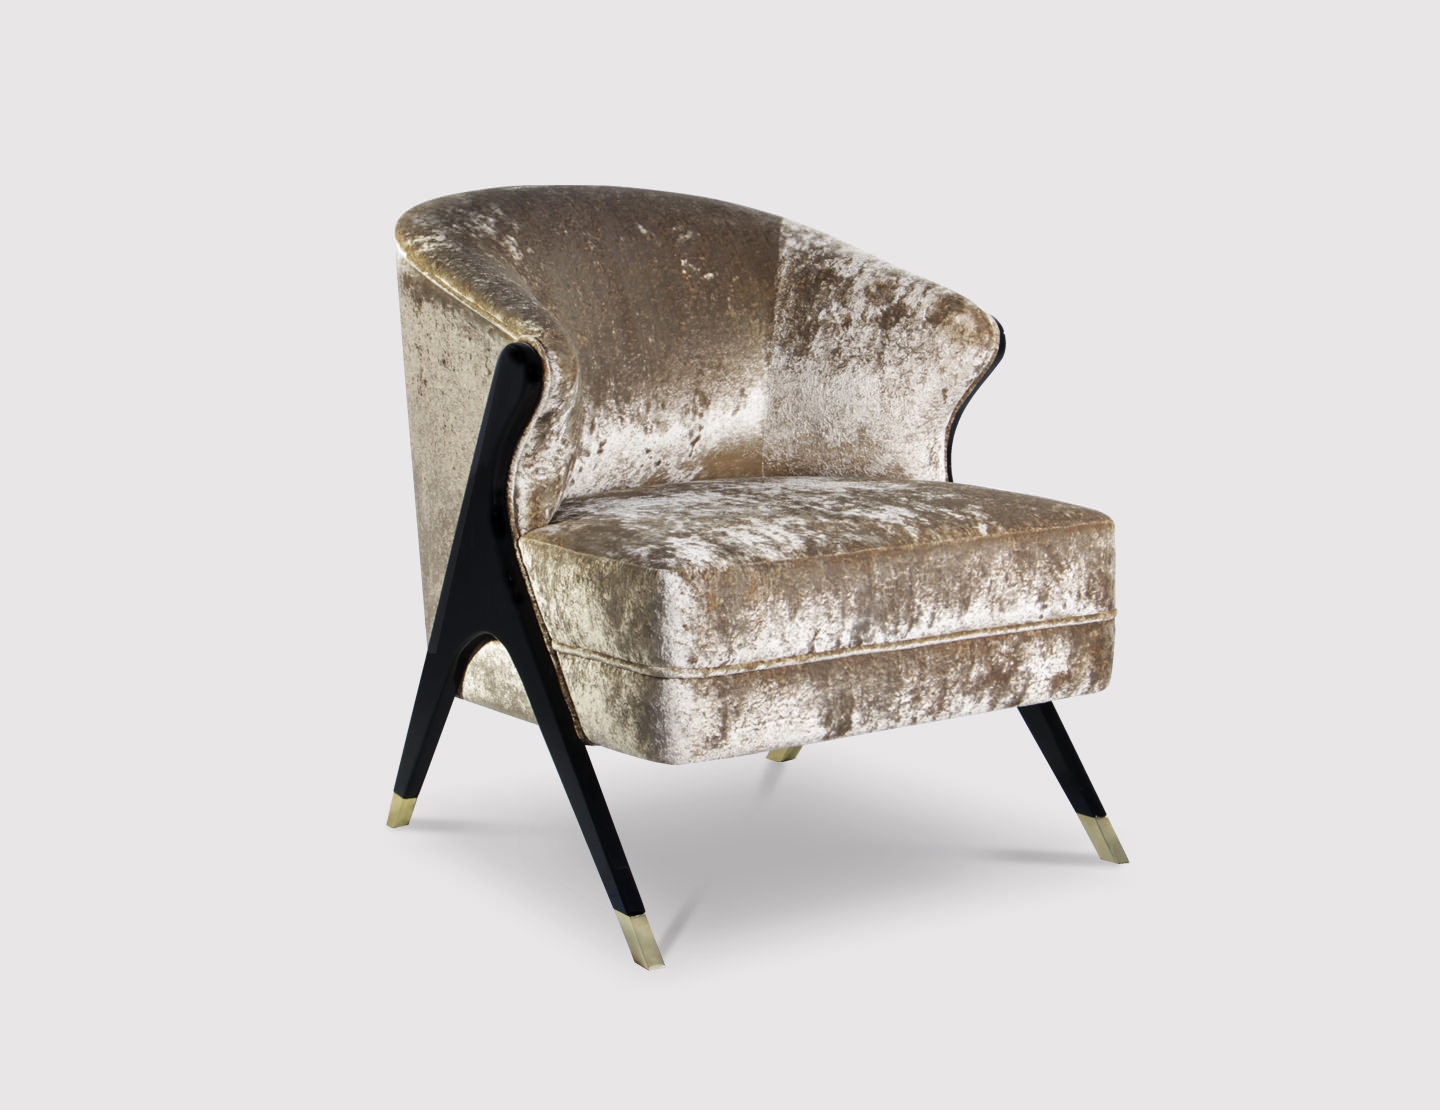 A plush upholstered seat is delicately framed by chicly lacquered mid-century modern legs stylishly capped in metal.